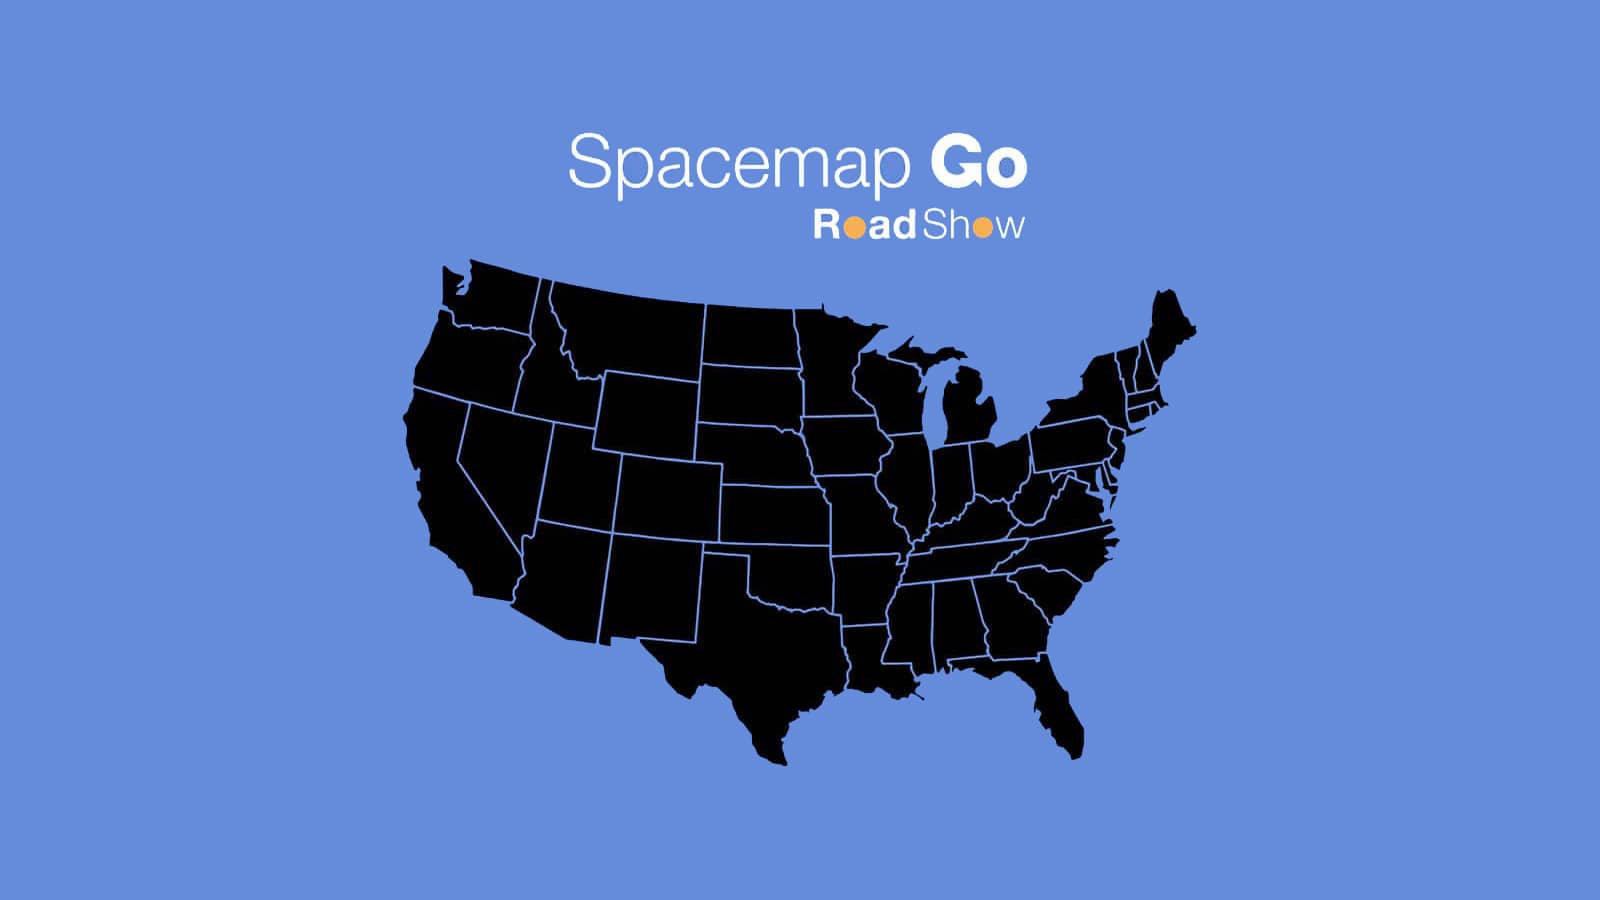 Meyer Sound Spacemap Go Roadshow Adds New Dates from July through December